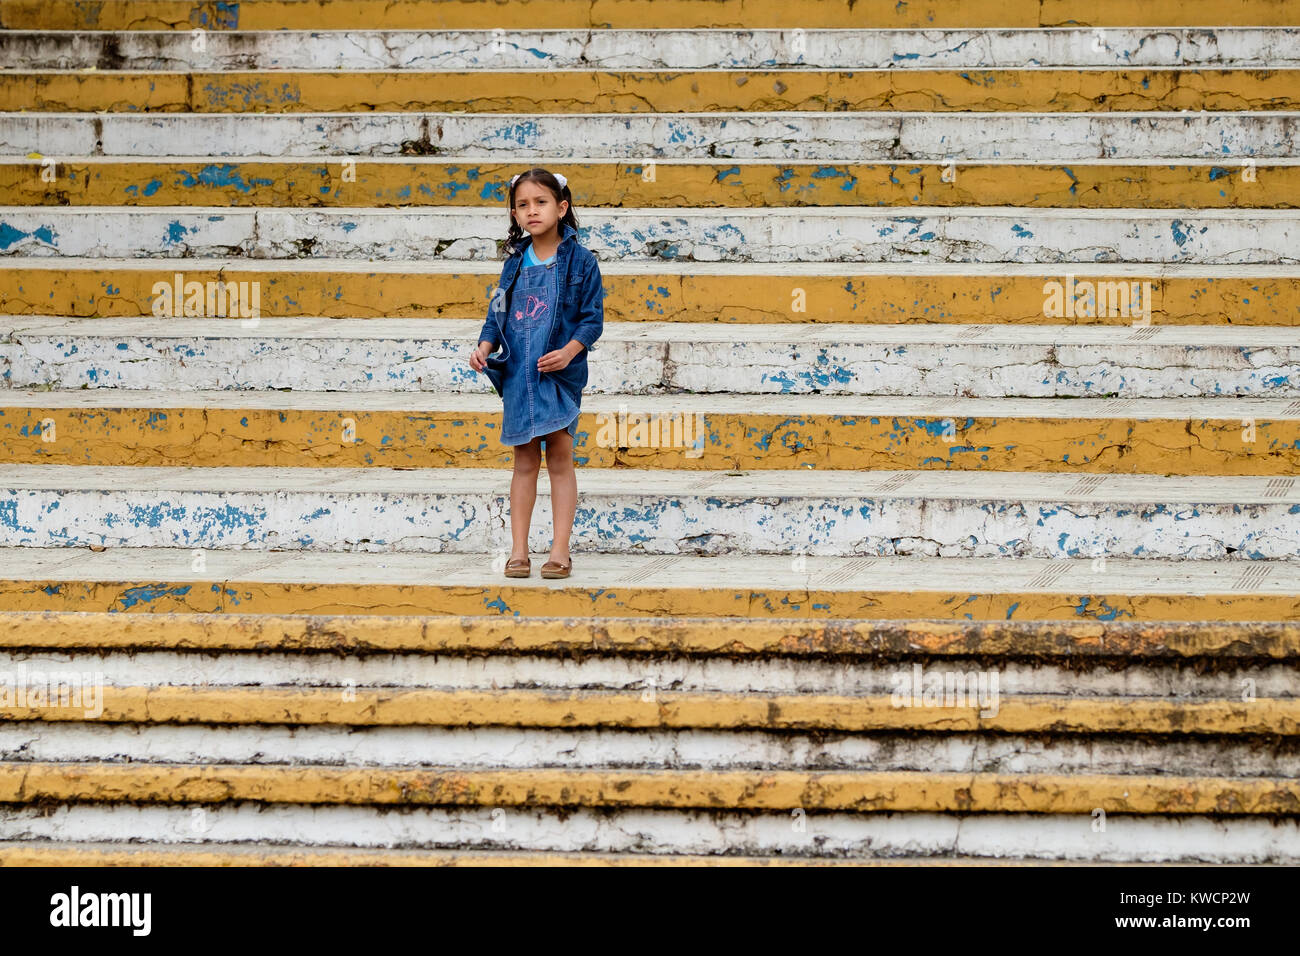 A girl standing on the steps of the The Guadalupe Church in San Cristóbal de Las Casas, Mexico Stock Photo